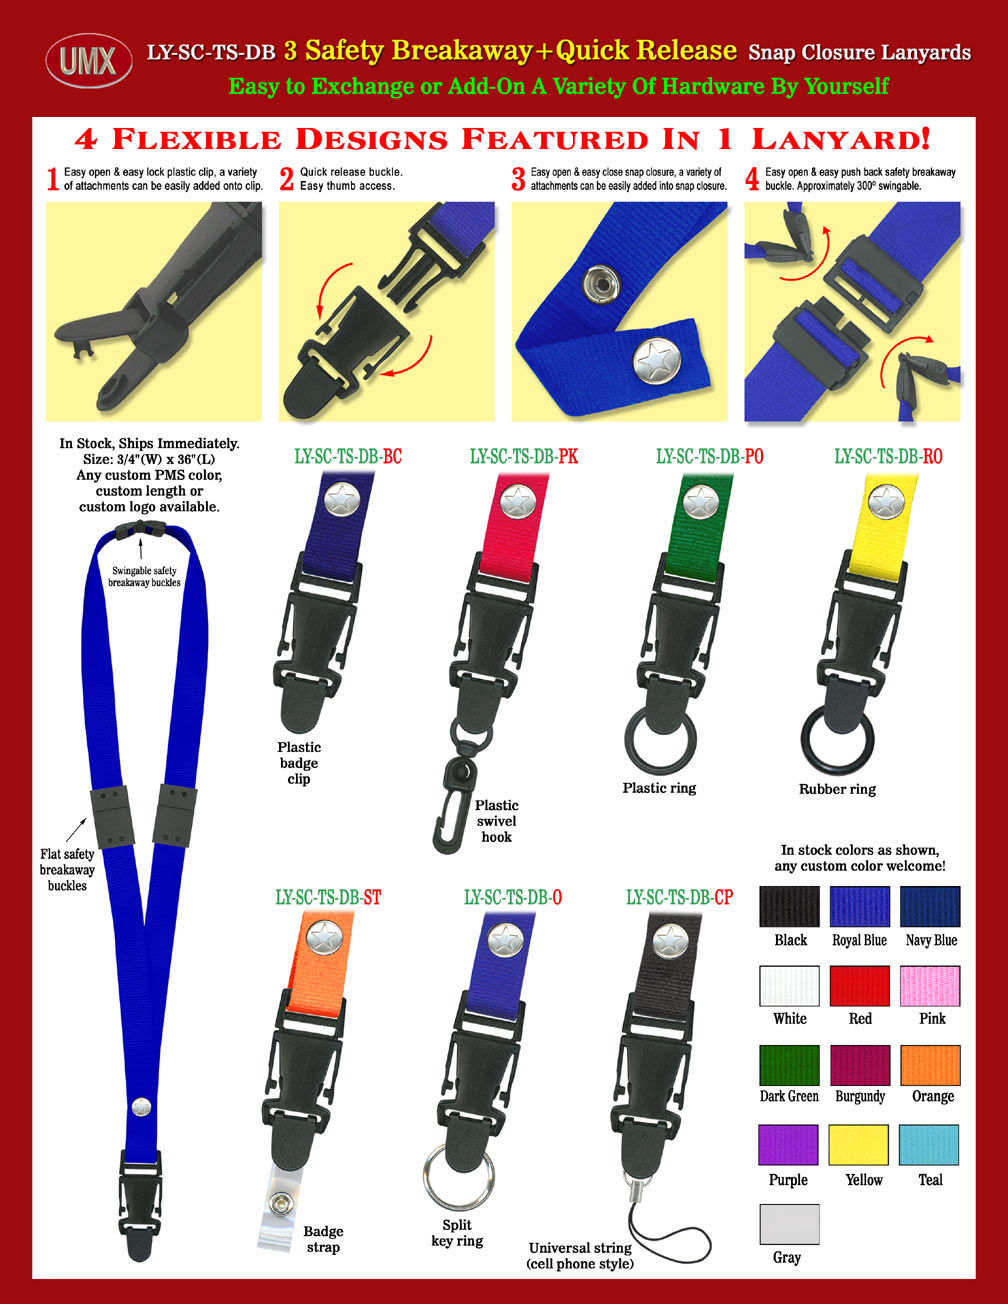 Quick Release and Triple Safety Snap-On Lanyards- 3/4"  Snap-On Safety Lanyards With Three Safety Breakaway Protection.